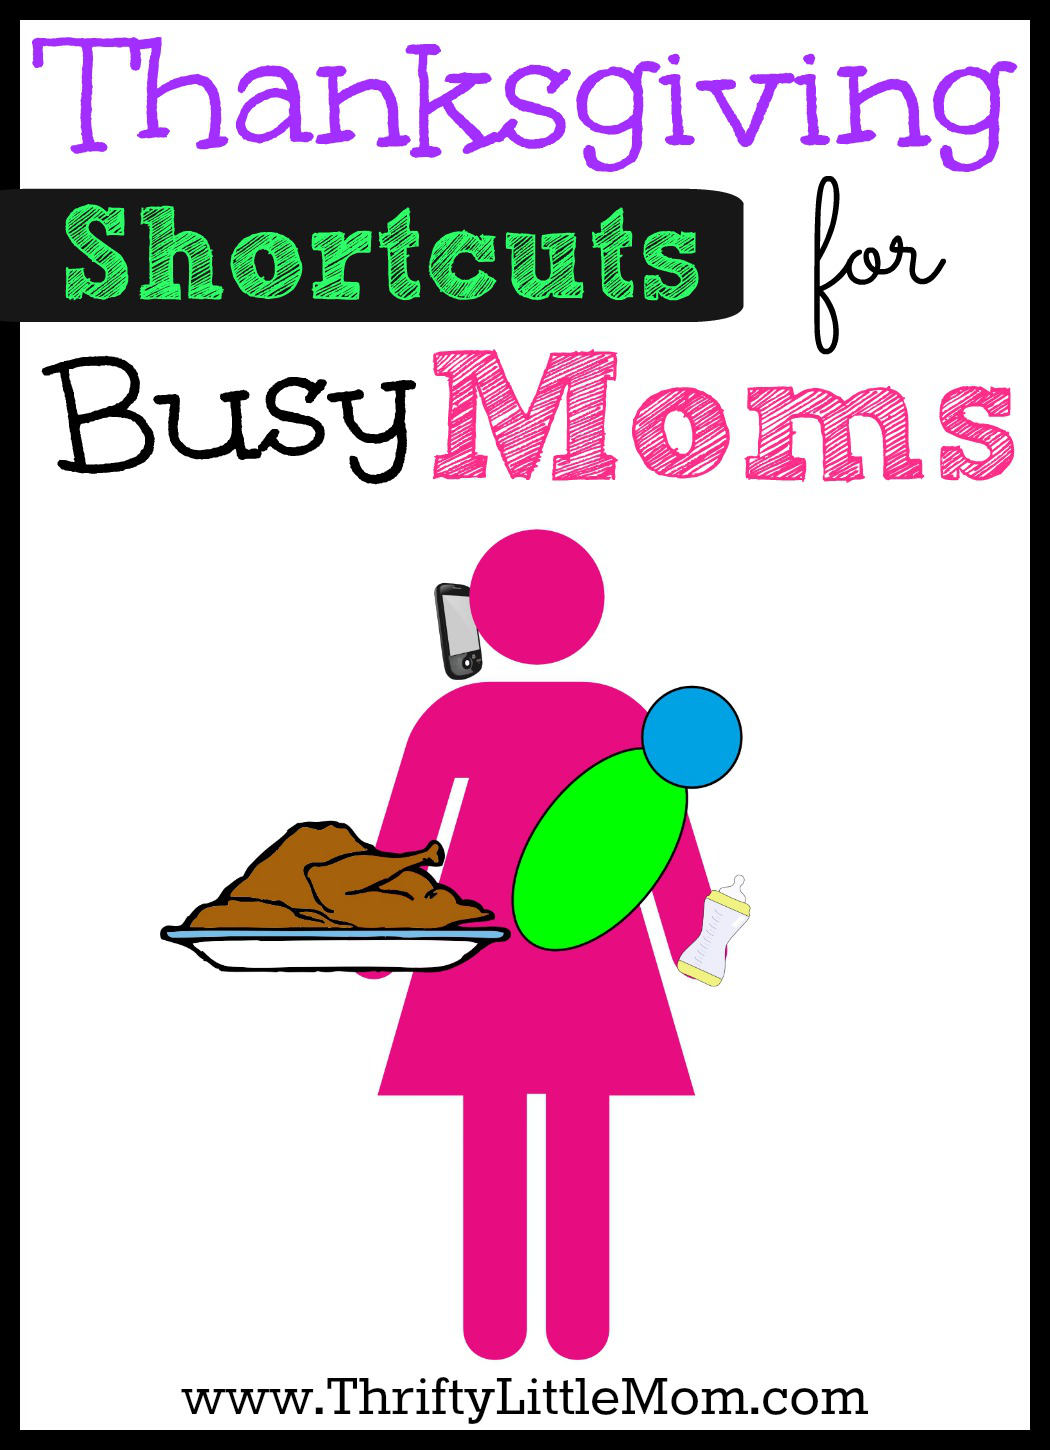 Thanksgiving Short-cuts for busy moms who are trying to survive and thrive during the holiday season.